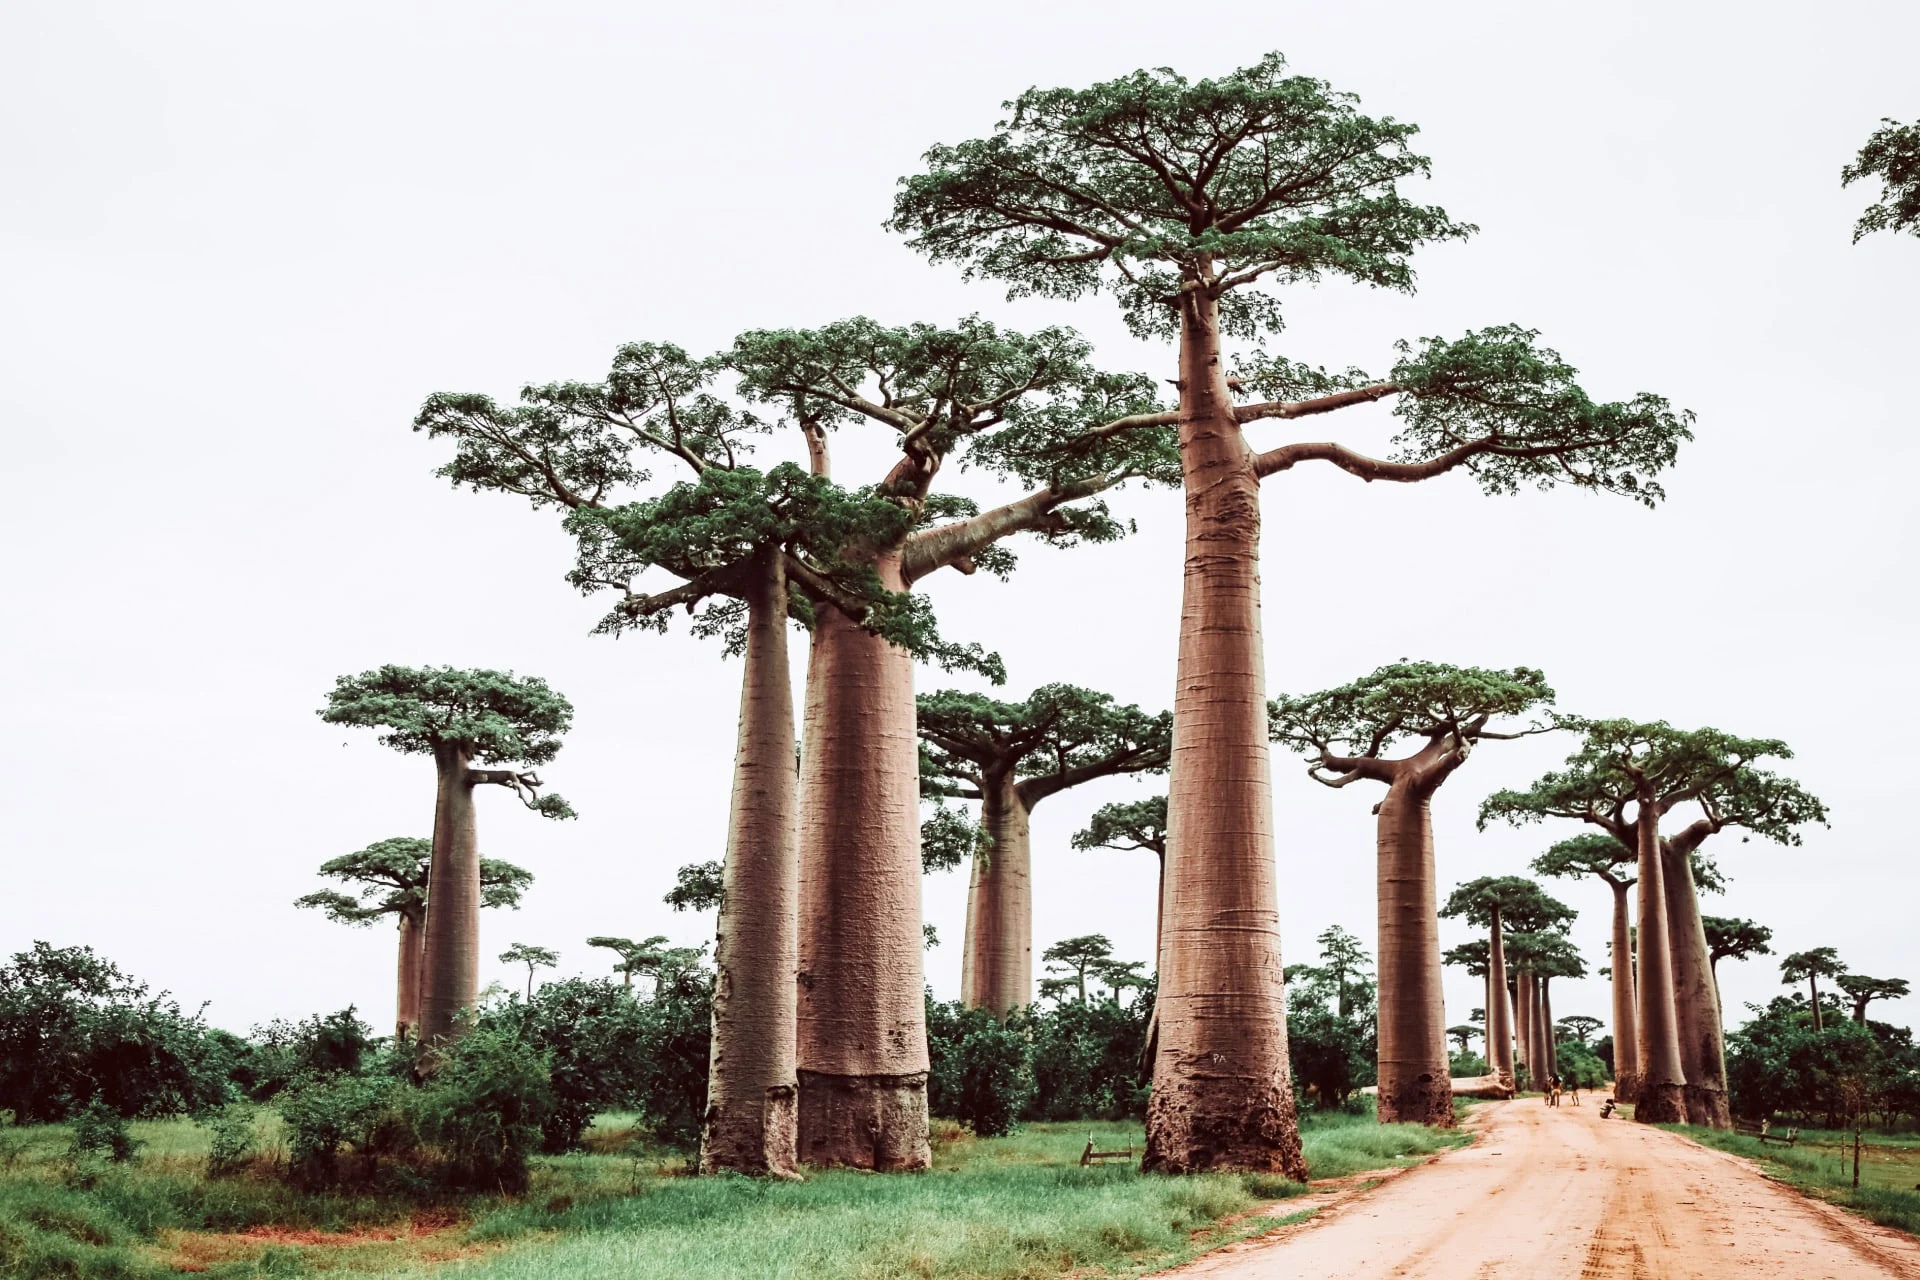 A dirt road lined with many baobab trees.